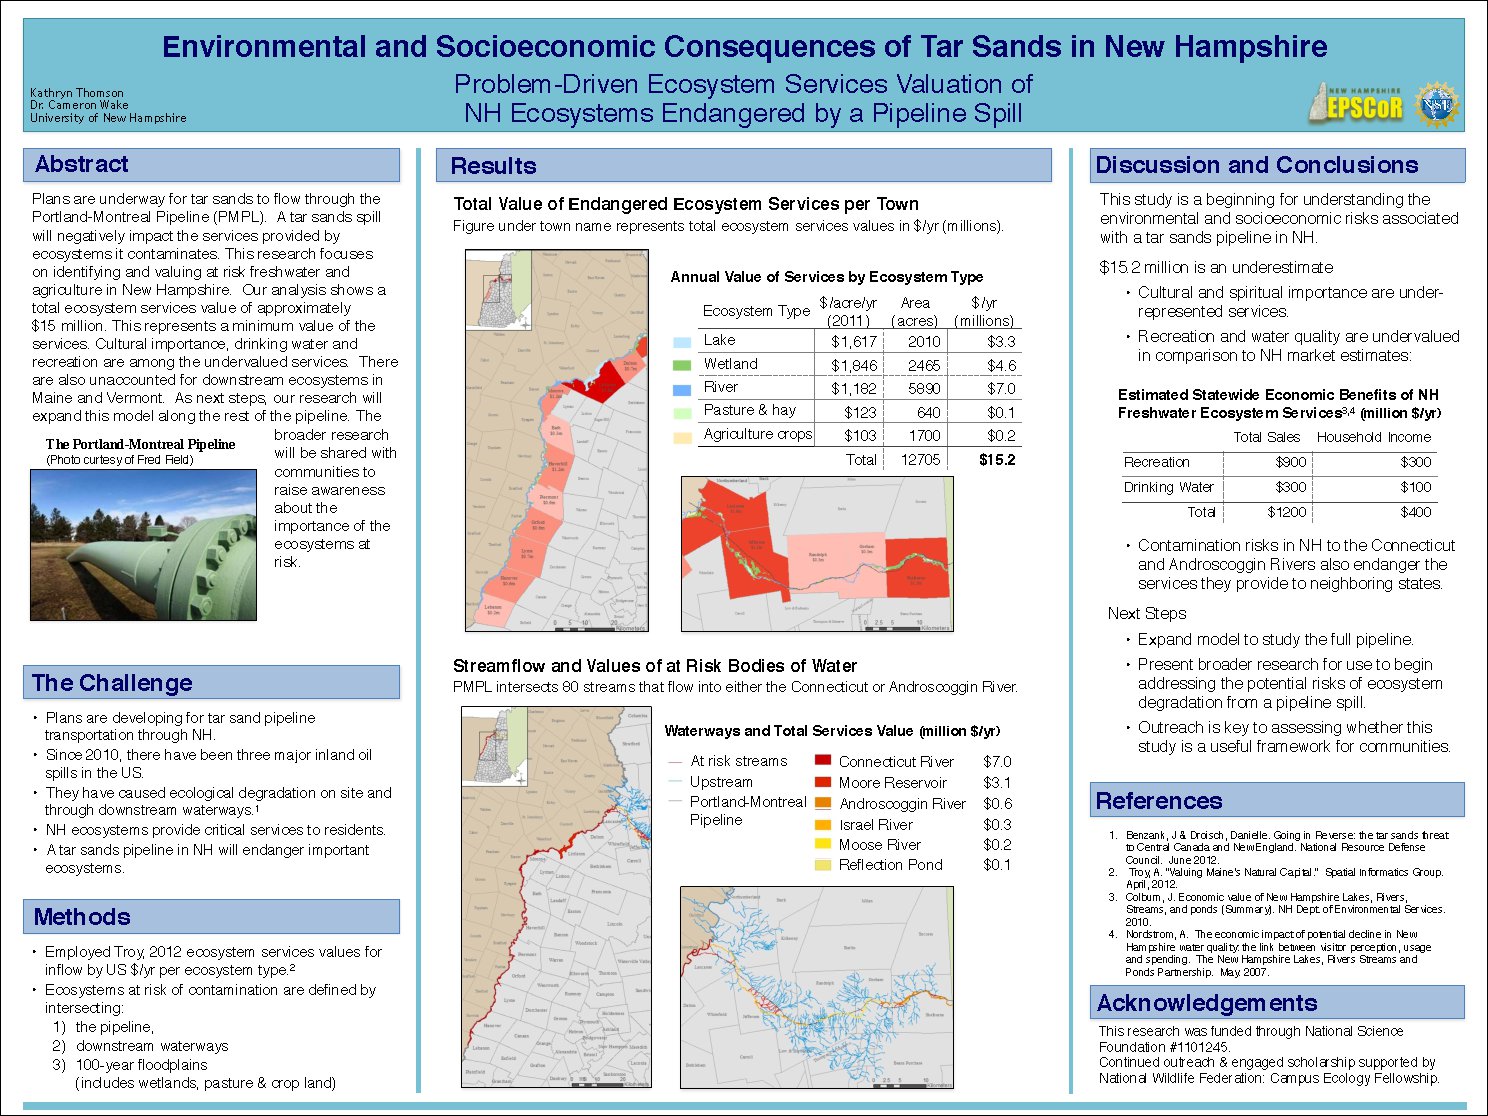 Ecosystem Services Valuation Of Nh Ecosystems Endangered By A Pipeline Spill by kpb39